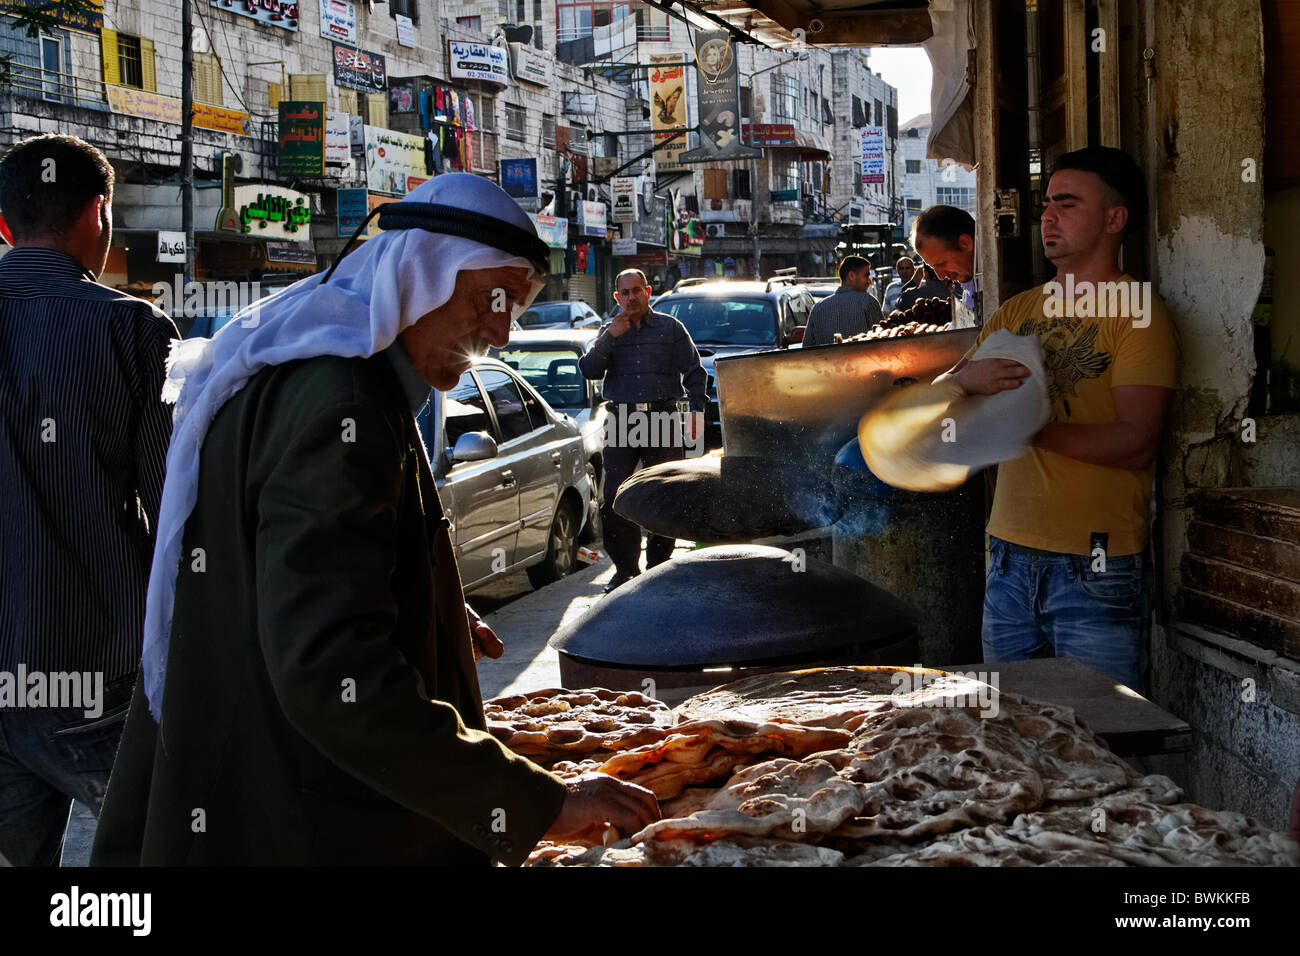 A palestinian in traditional clothing, choosing pita in a street of Ramallah Stock Photo